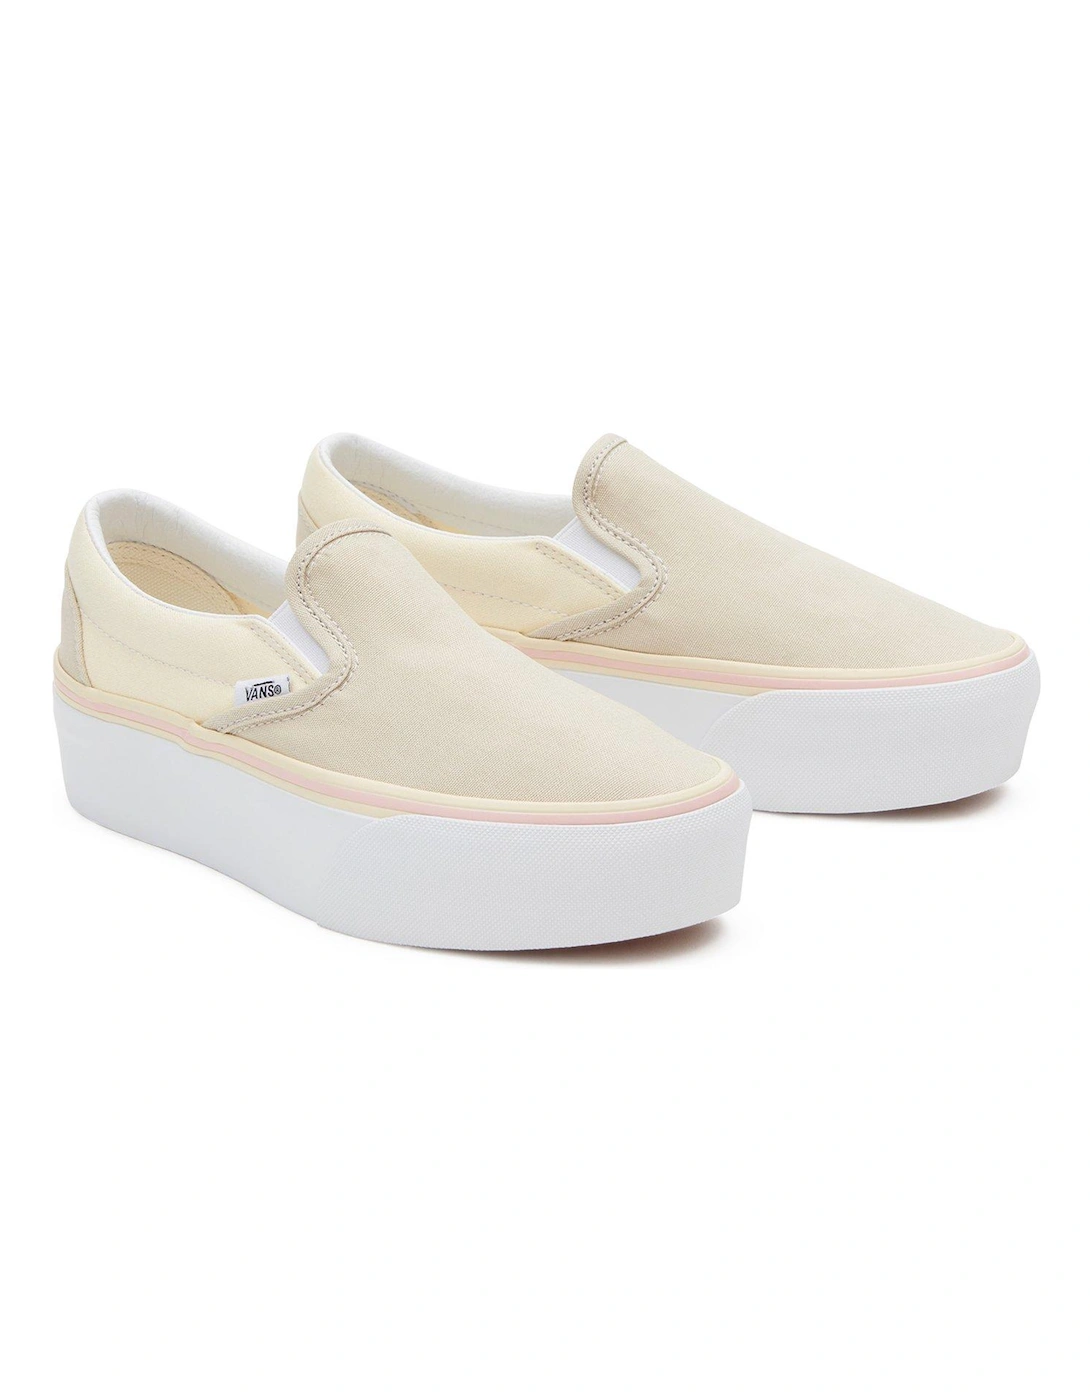 Womens Classic Slip-on Stackform Trainers - Multi